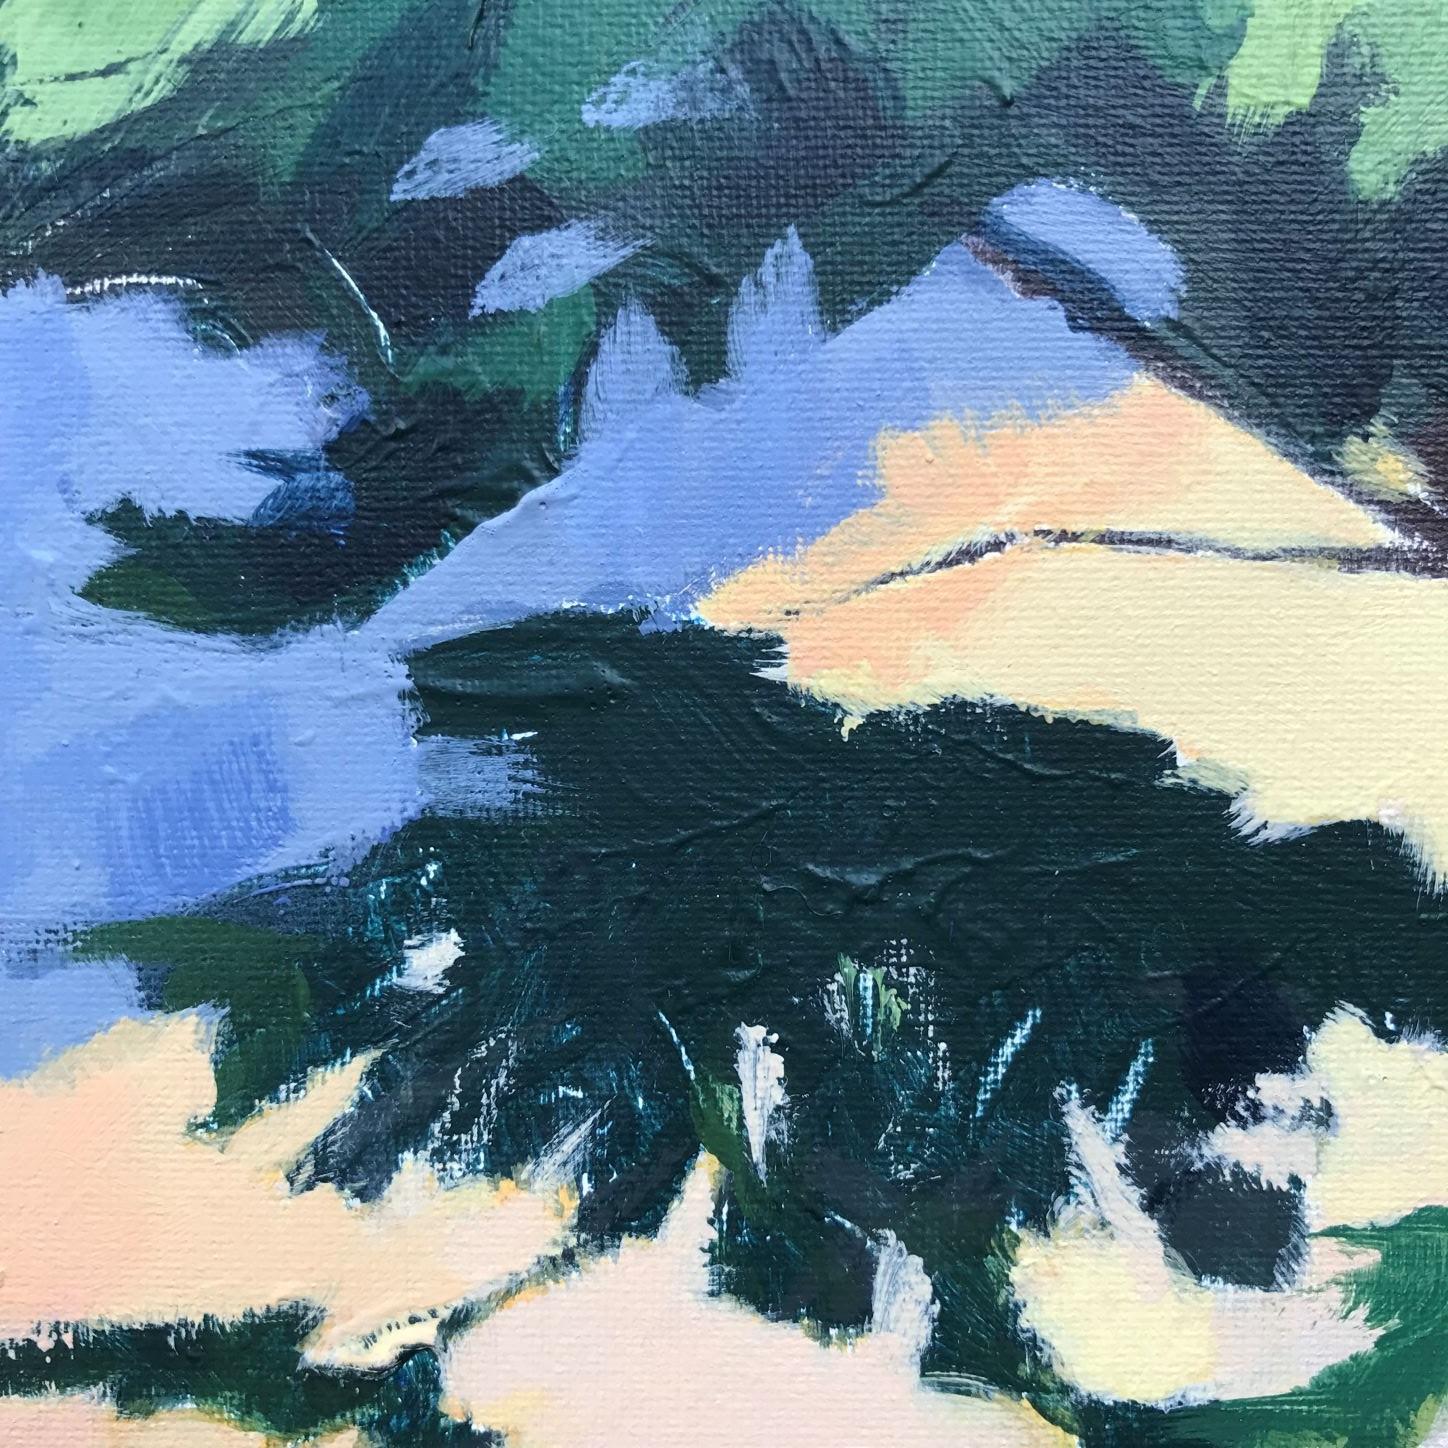 Cedar of Lebanon at Sunset By Margaret Crutchley [2021]

original
Acrylic on a deep canvas
Image size: H:50 cm x W:50 cm
Complete Size of Unframed Work: H:50 cm x W:50 cm x D:4cm
Sold Unframed
Please note that insitu images are purely an indication